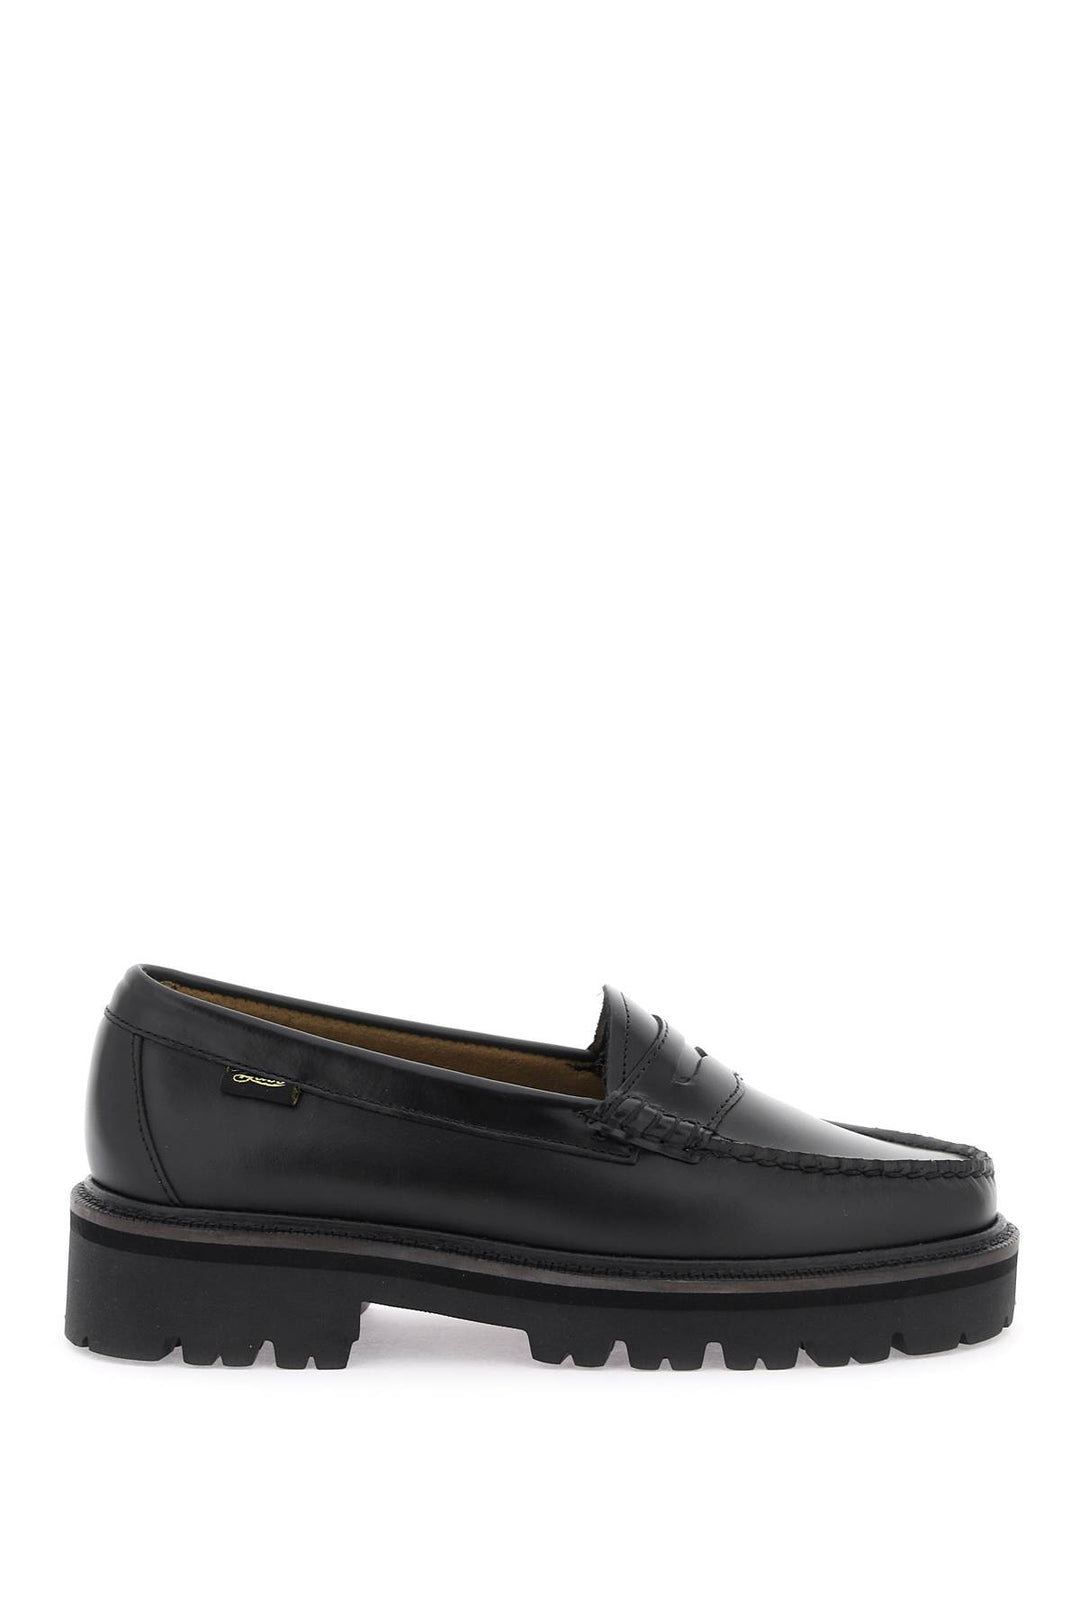 G.H. Bass Weejuns Super Lug Loafers   Nero